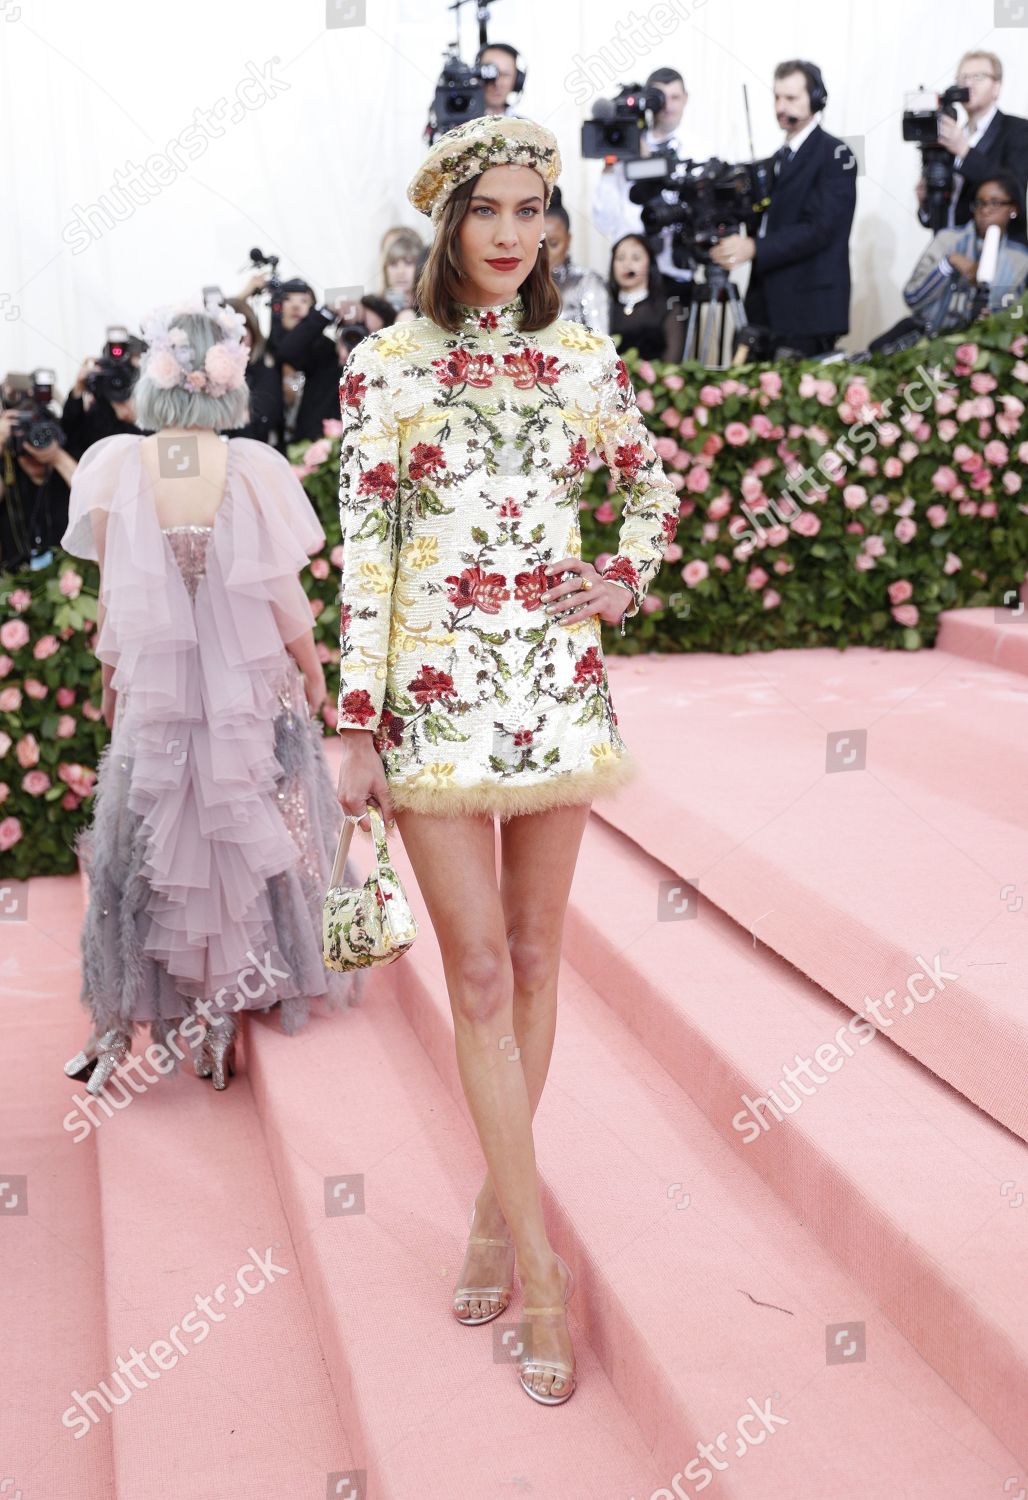 Alexa Chung Arrives On Red Carpet 2019 Editorial Stock Photo Stock Image Shutterstock